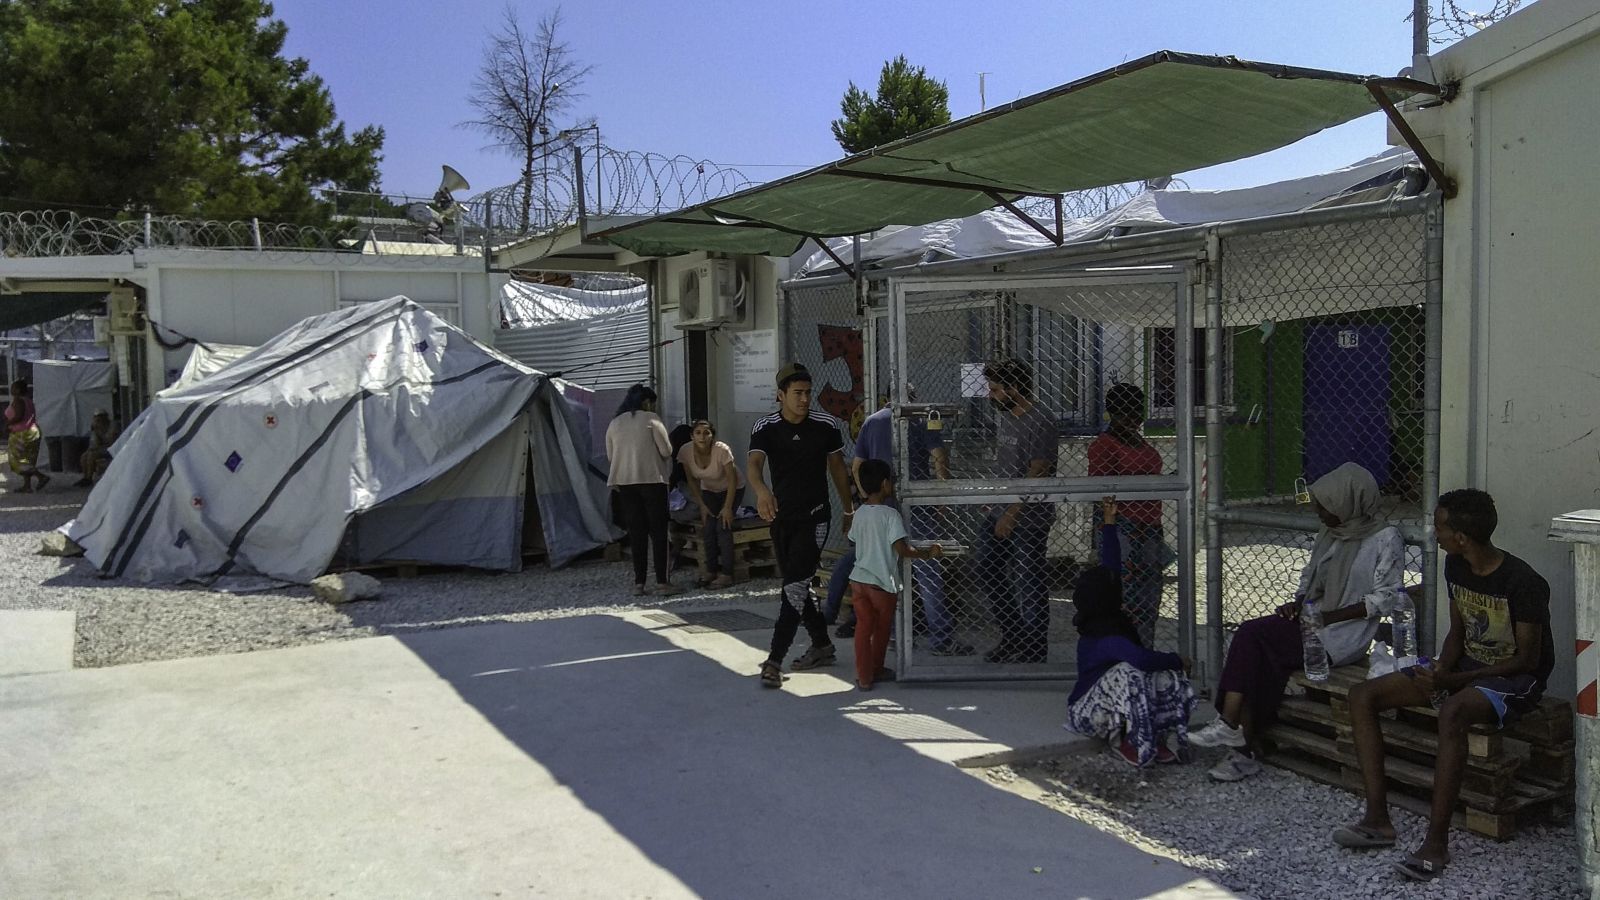 Spending on refugees in OECD countries counts as ODA: Moria refugee camp on the Greek island of Lesbos.